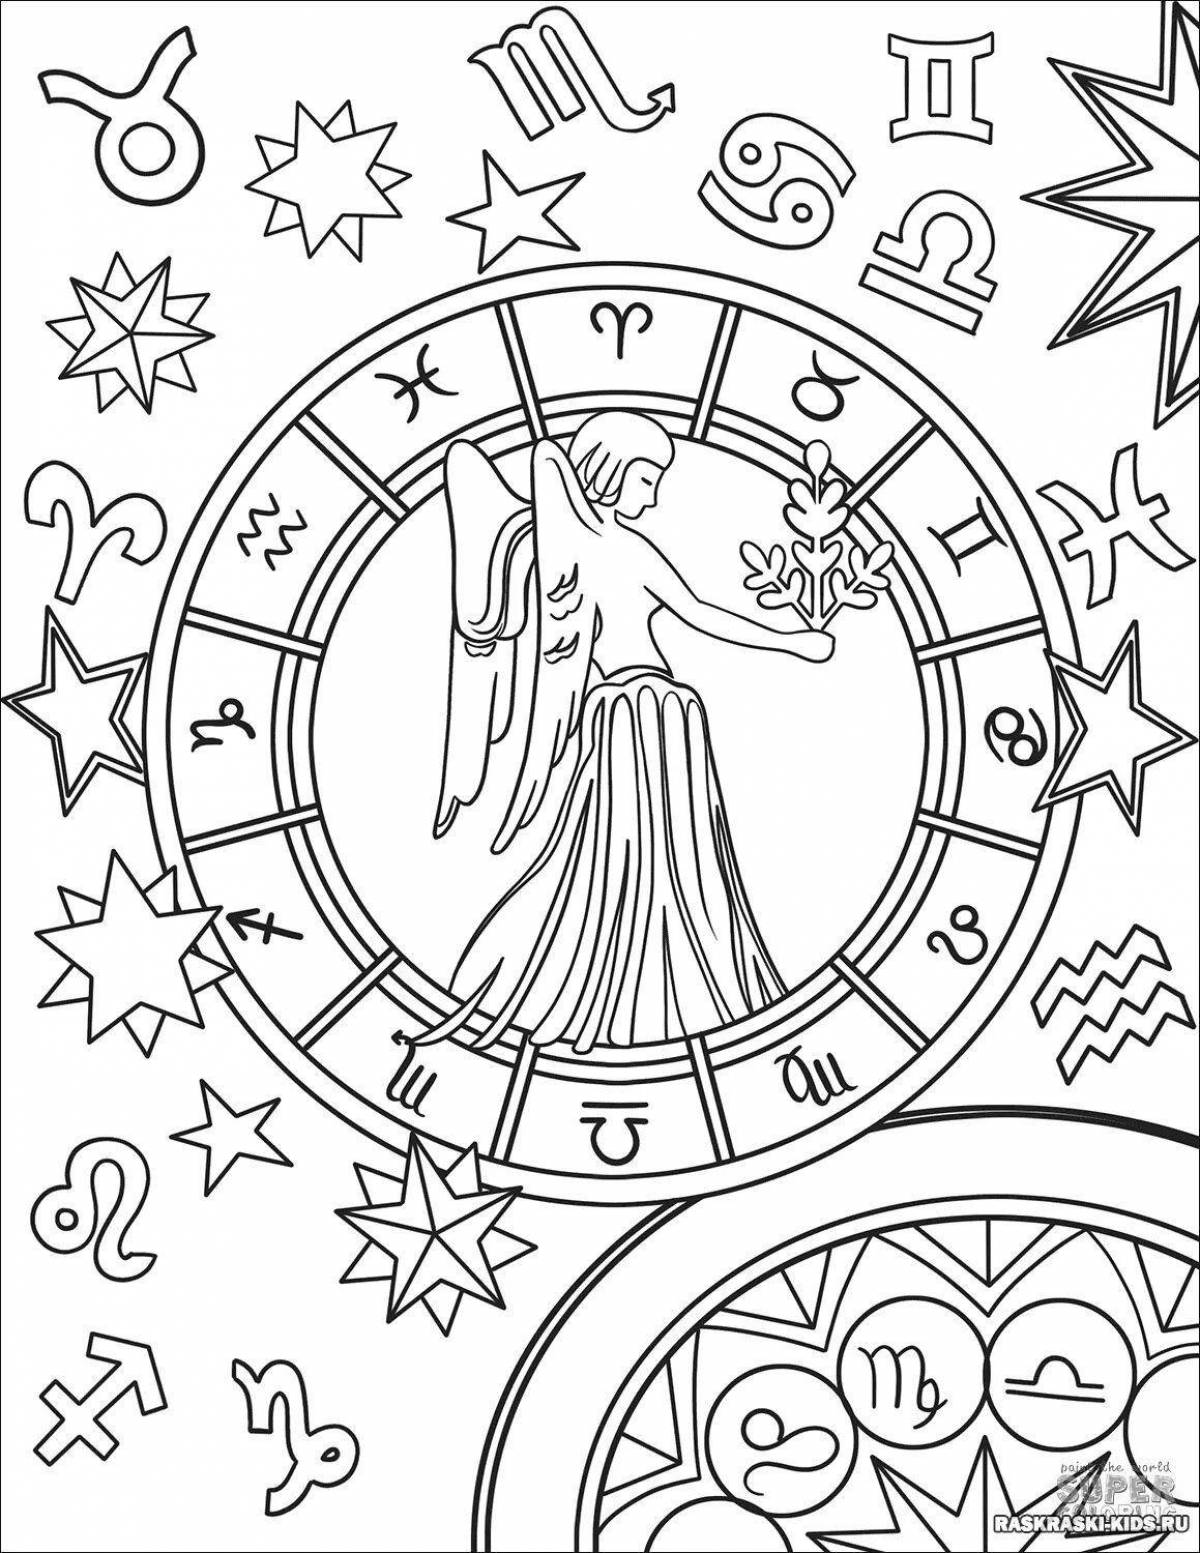 Colorful coloring pages with the signs of the zodiac for the development of concentration in children